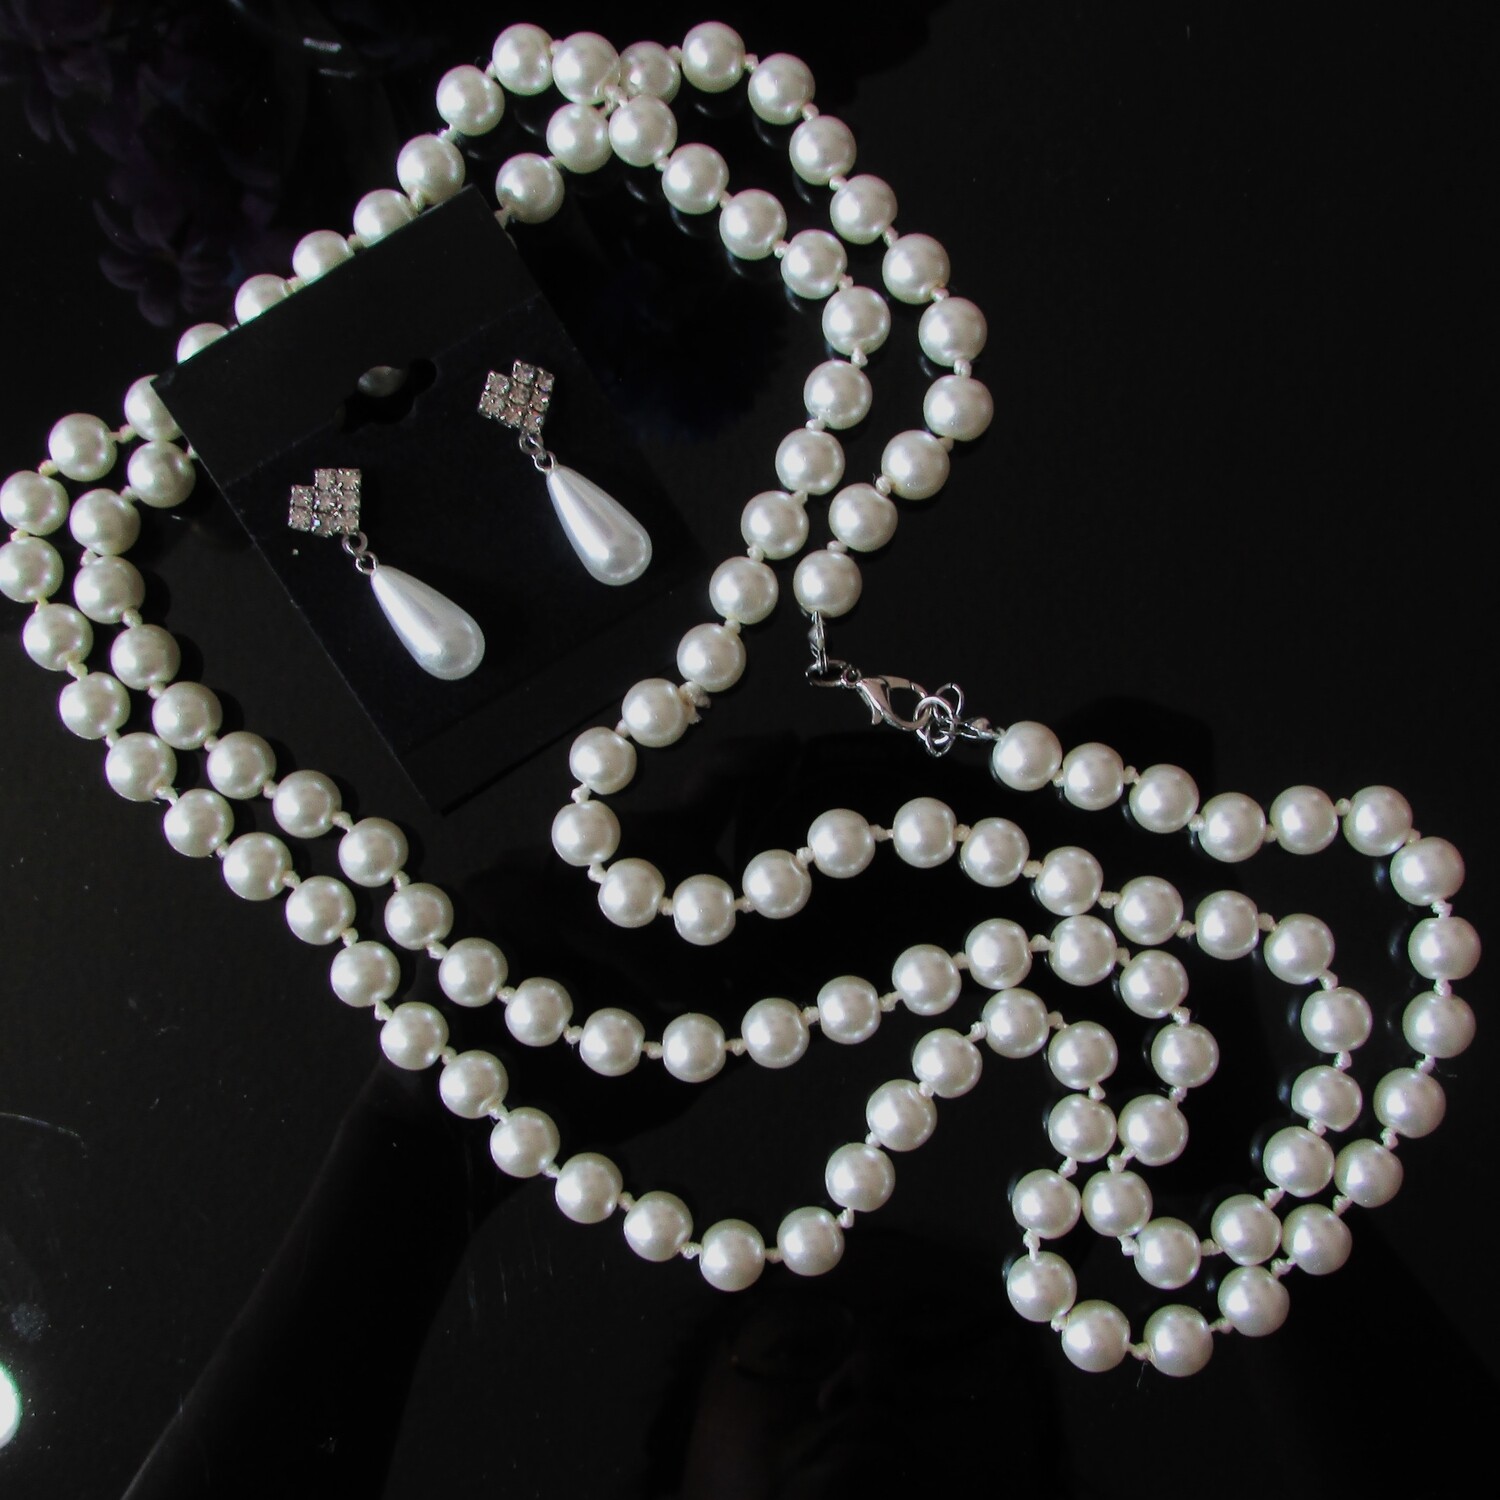 Vintage Ivory Faux Pearl Earrings and Necklace Set c. 1980's